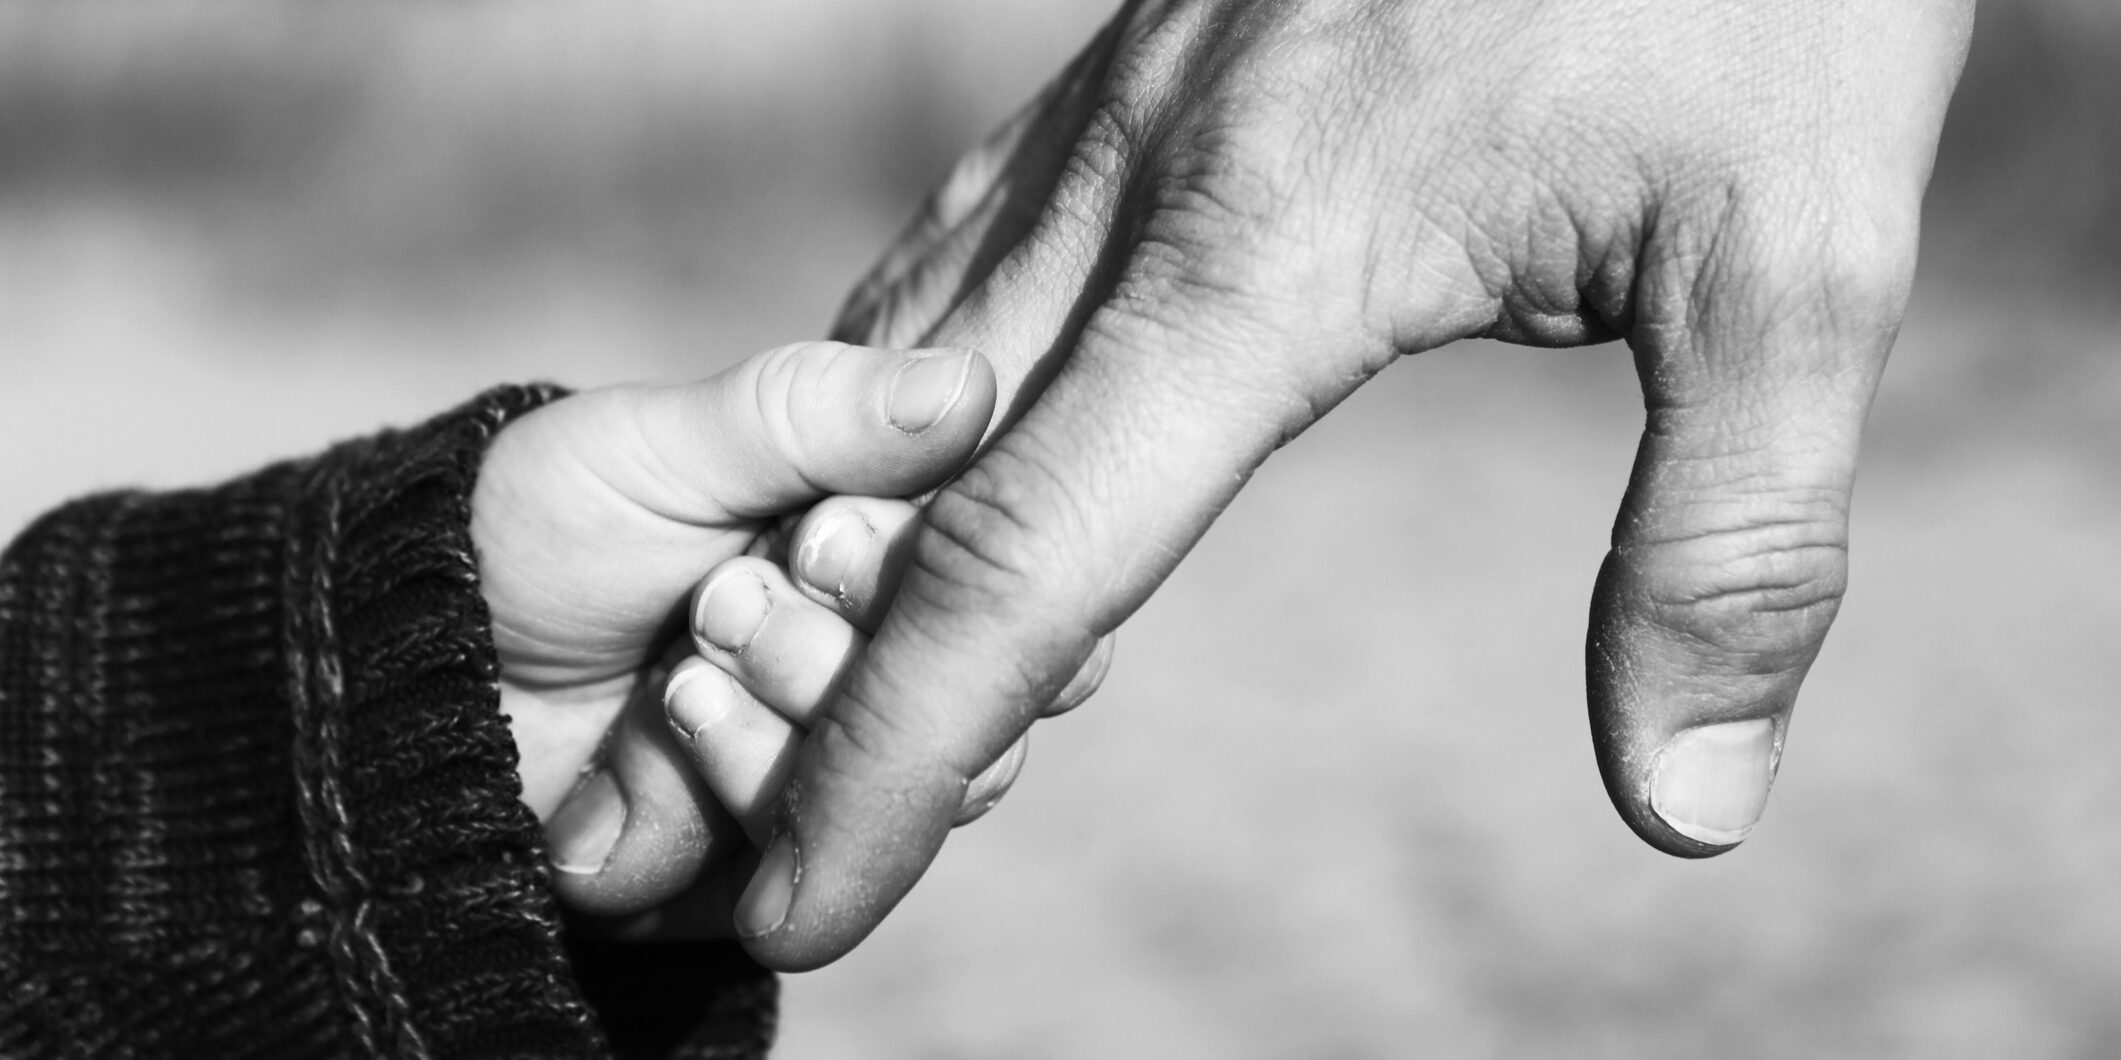 A close up image of a child's small hand holding his father's hand. Black and white mage with some graininess.